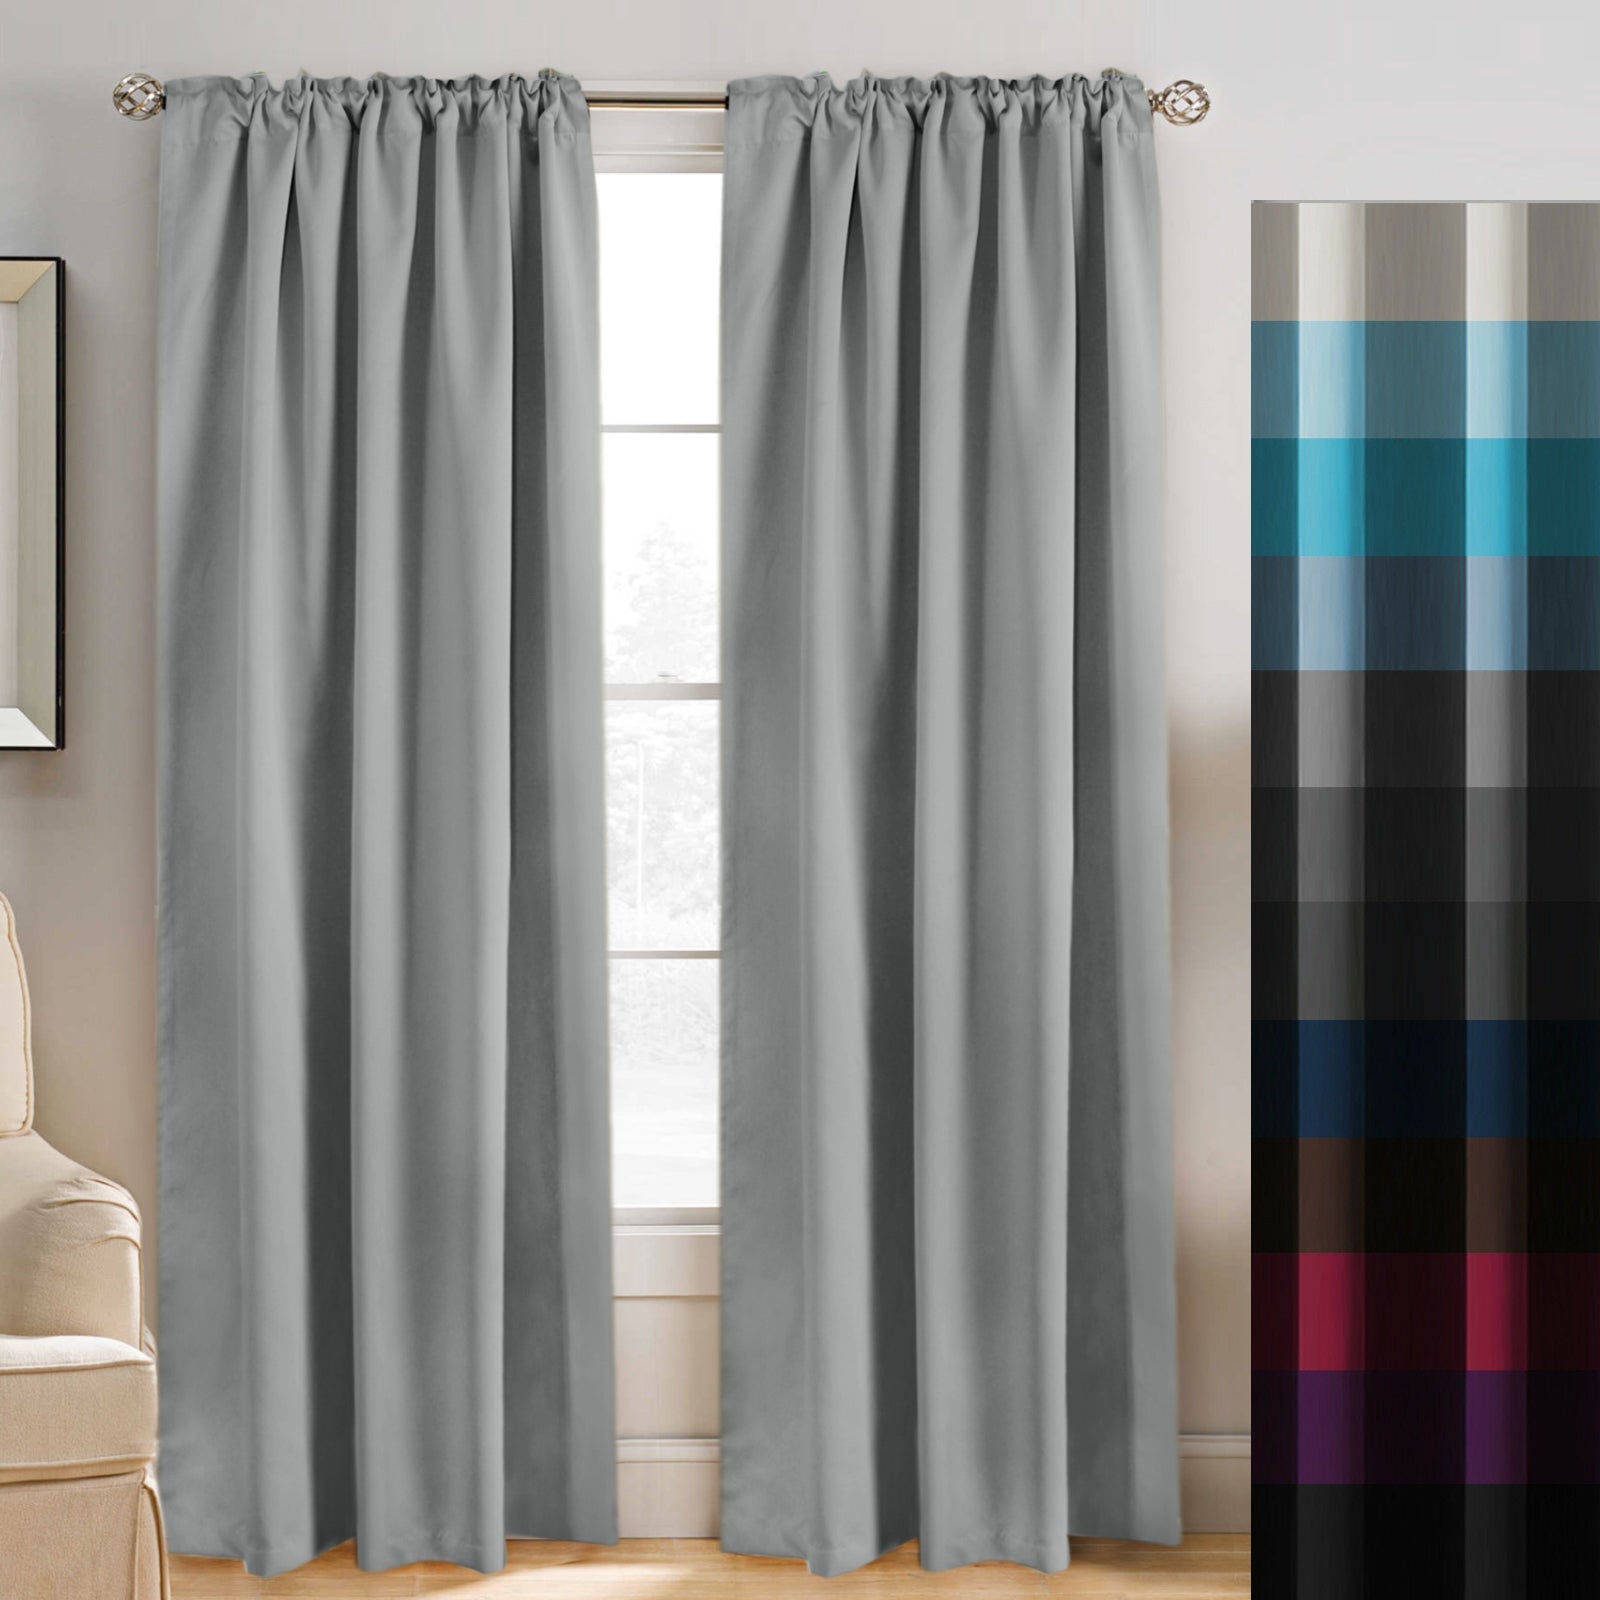 Blockout Rod Pocket Curtains Pair Blackout Thick Curtains for Bedroom Livingroom